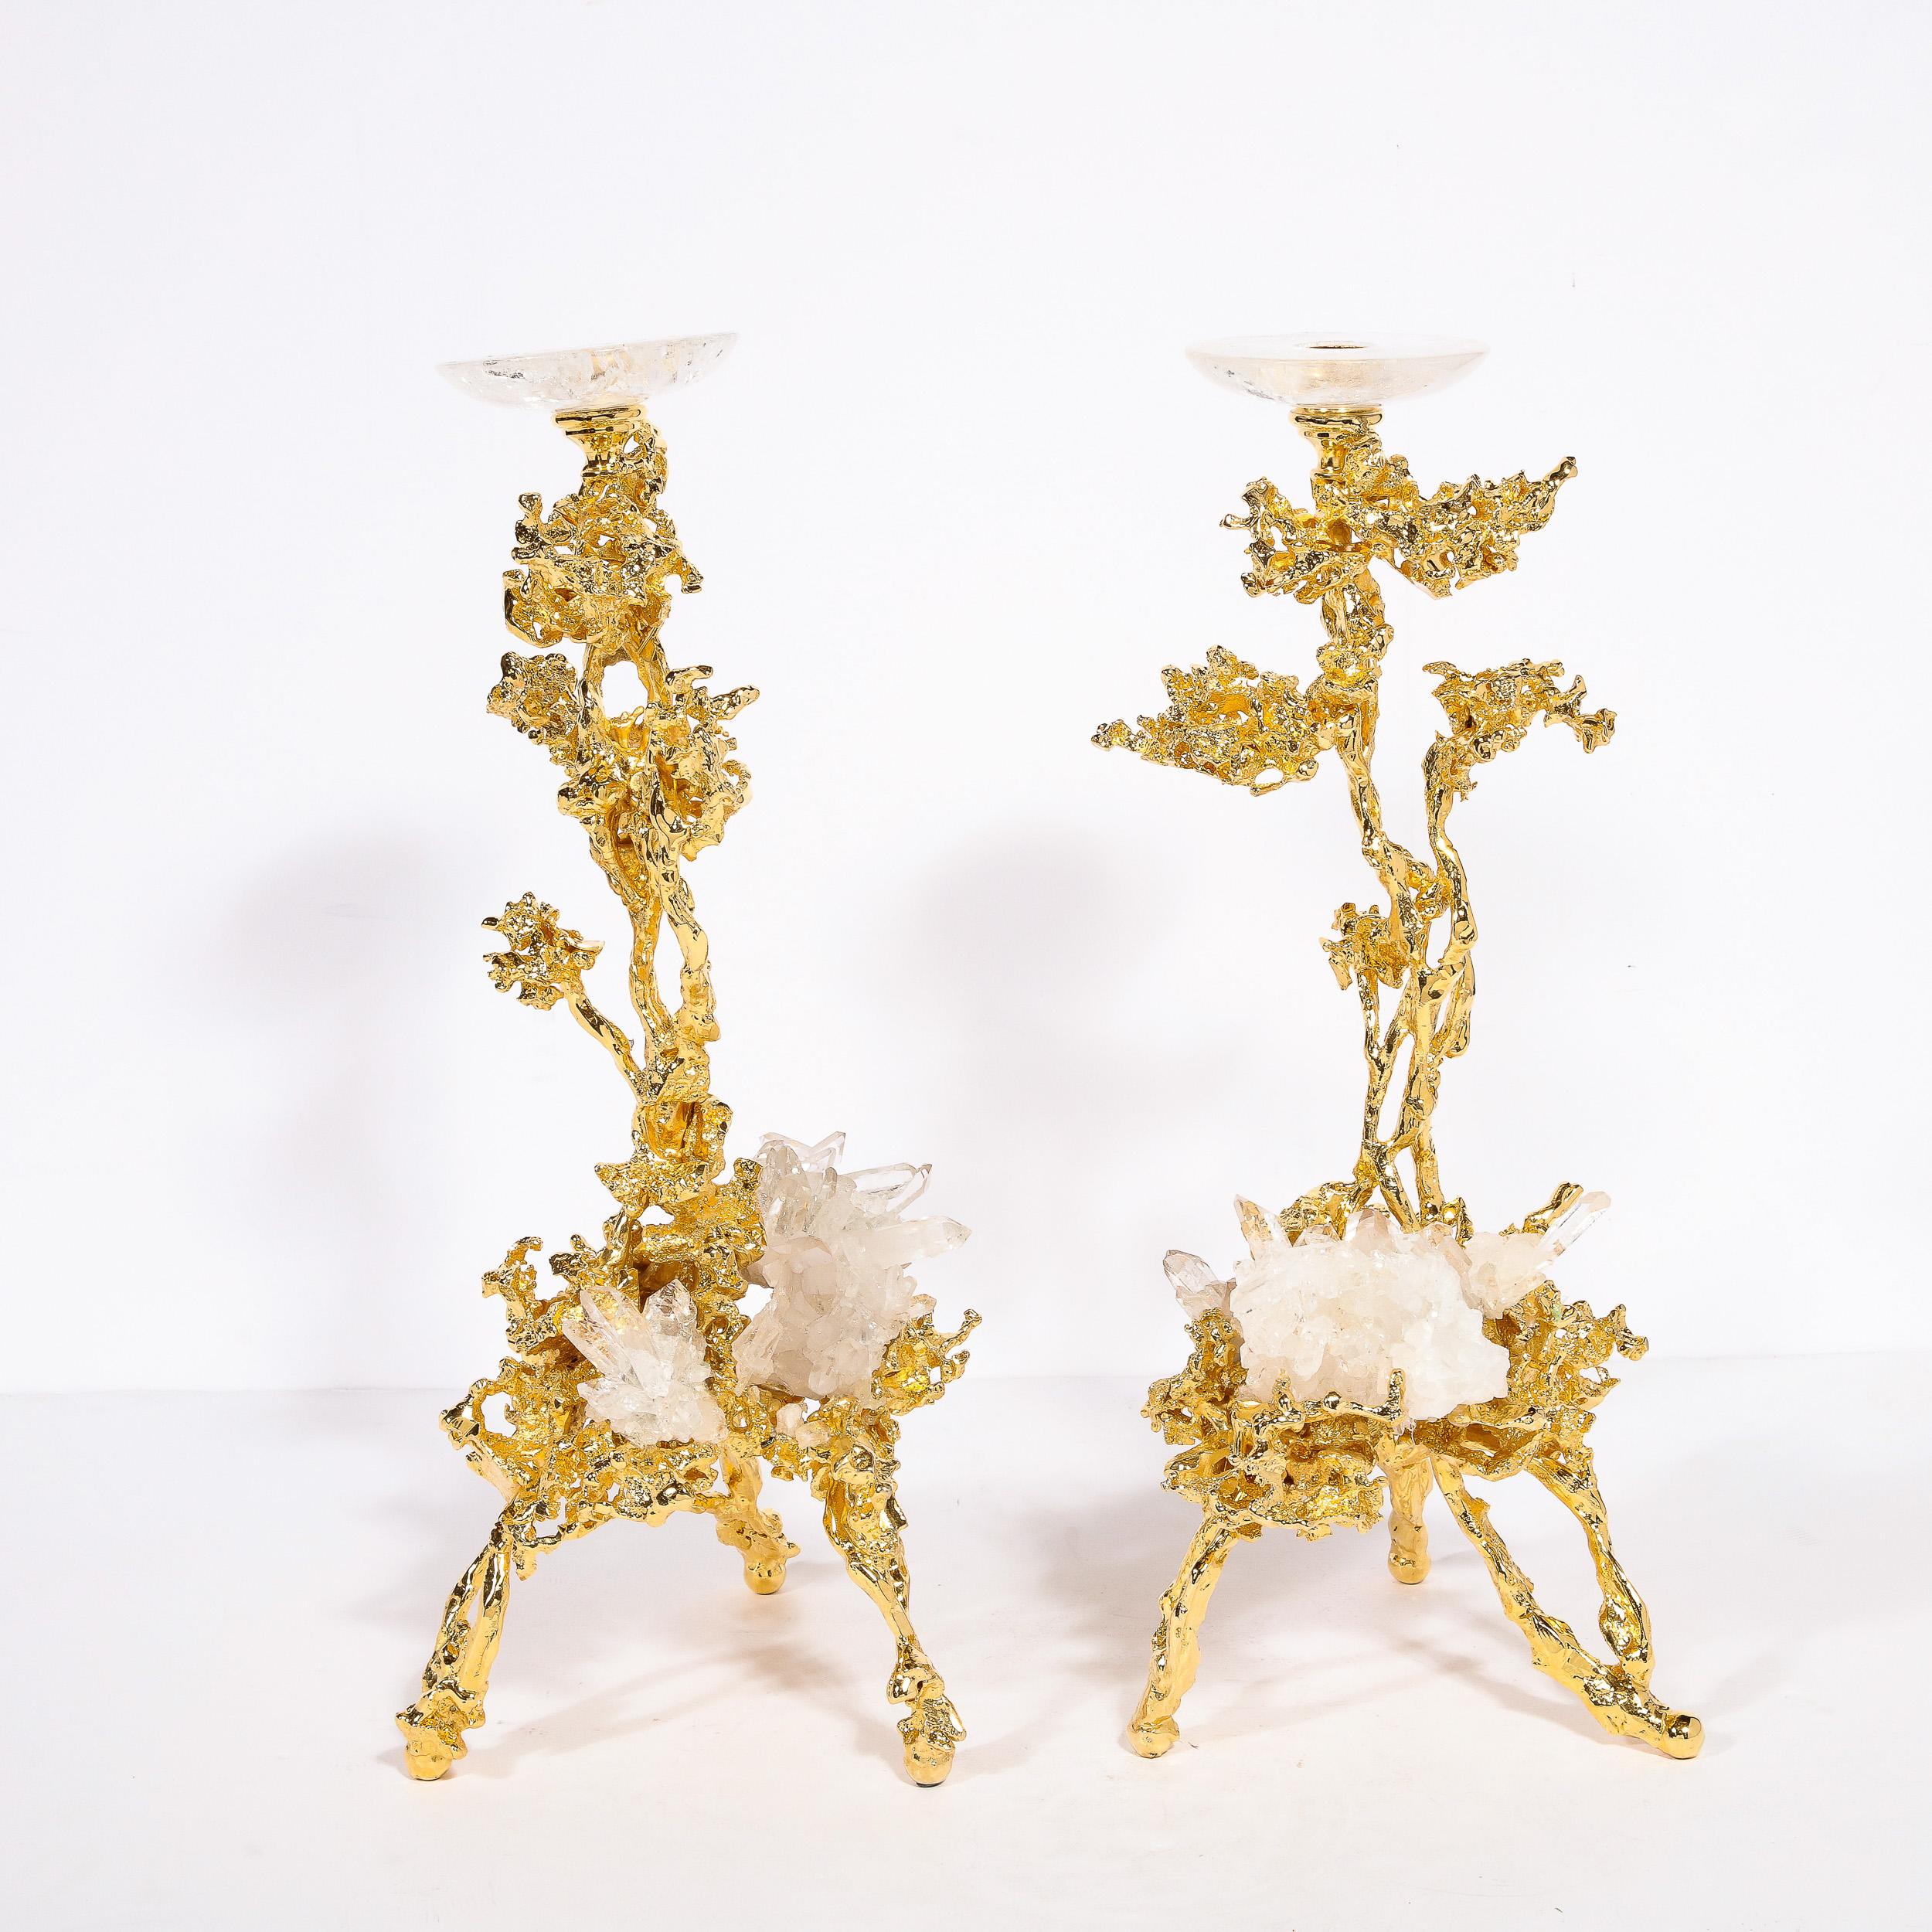 Pair of 24K Gold Single Branch Candleholders w/ Rock Crystals by Claude Boeltz For Sale 1